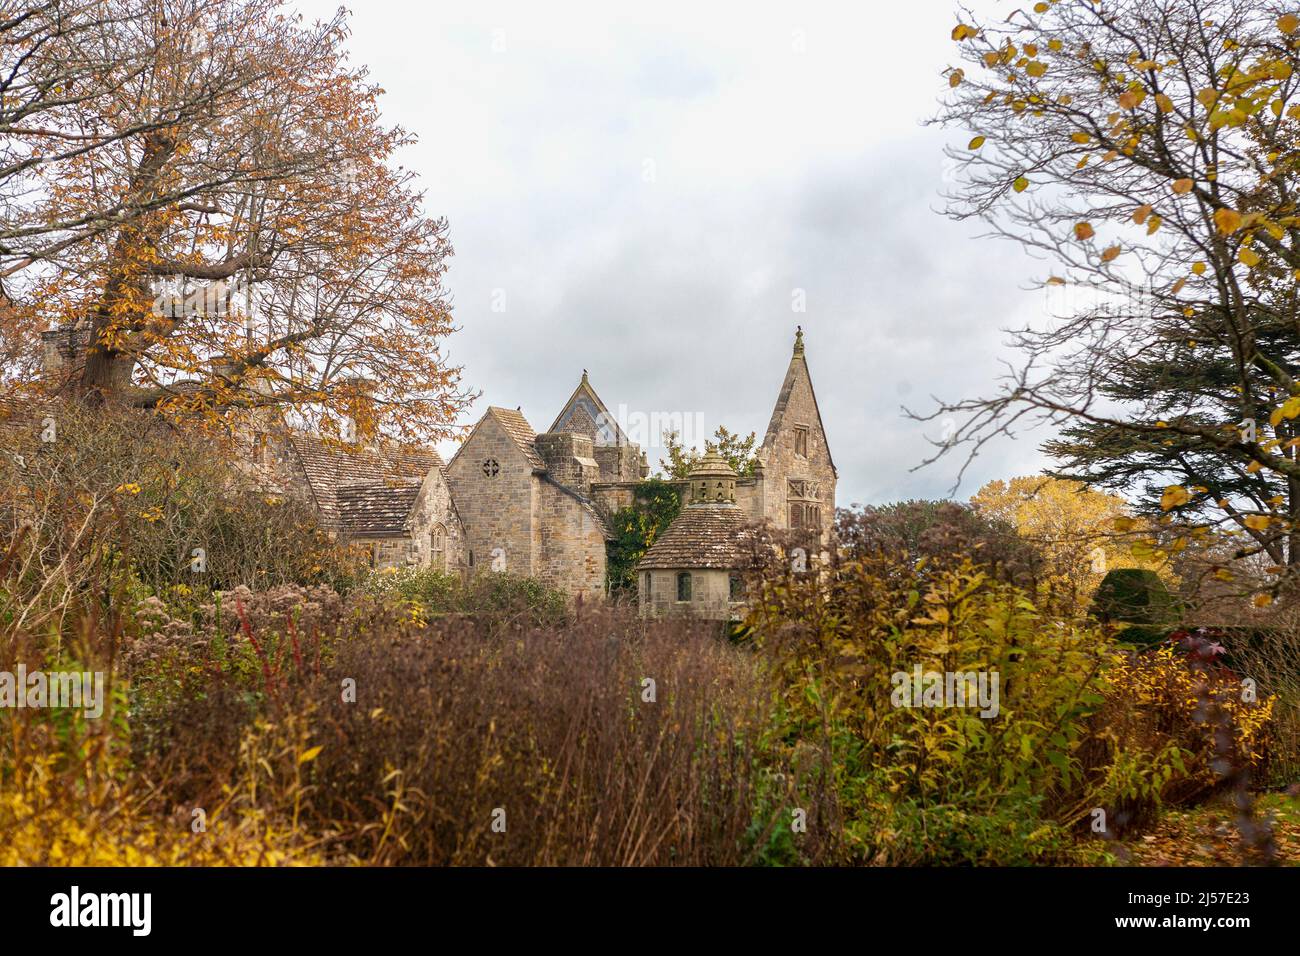 Late Autumn at Nymans, with the partly-ruined house framed by trees: Nymans, West Sussex, UK Stock Photo